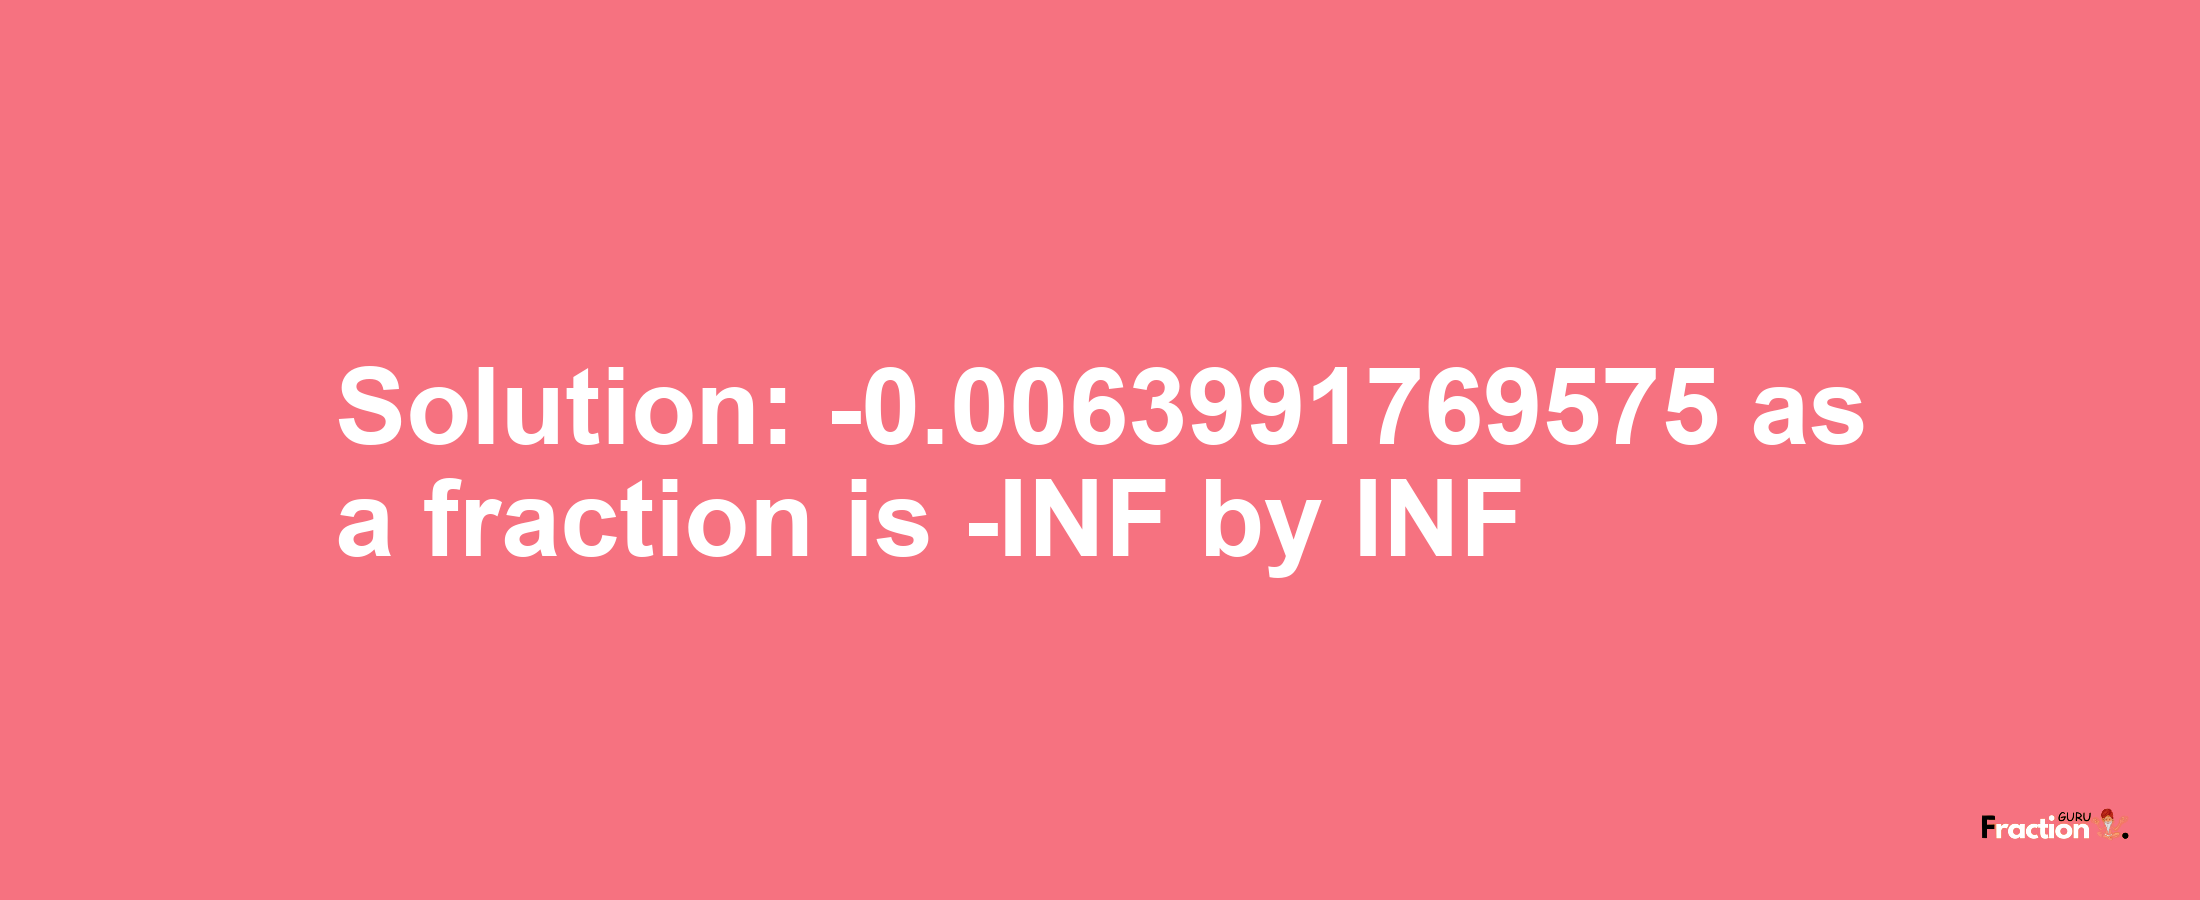 Solution:-0.0063991769575 as a fraction is -INF/INF